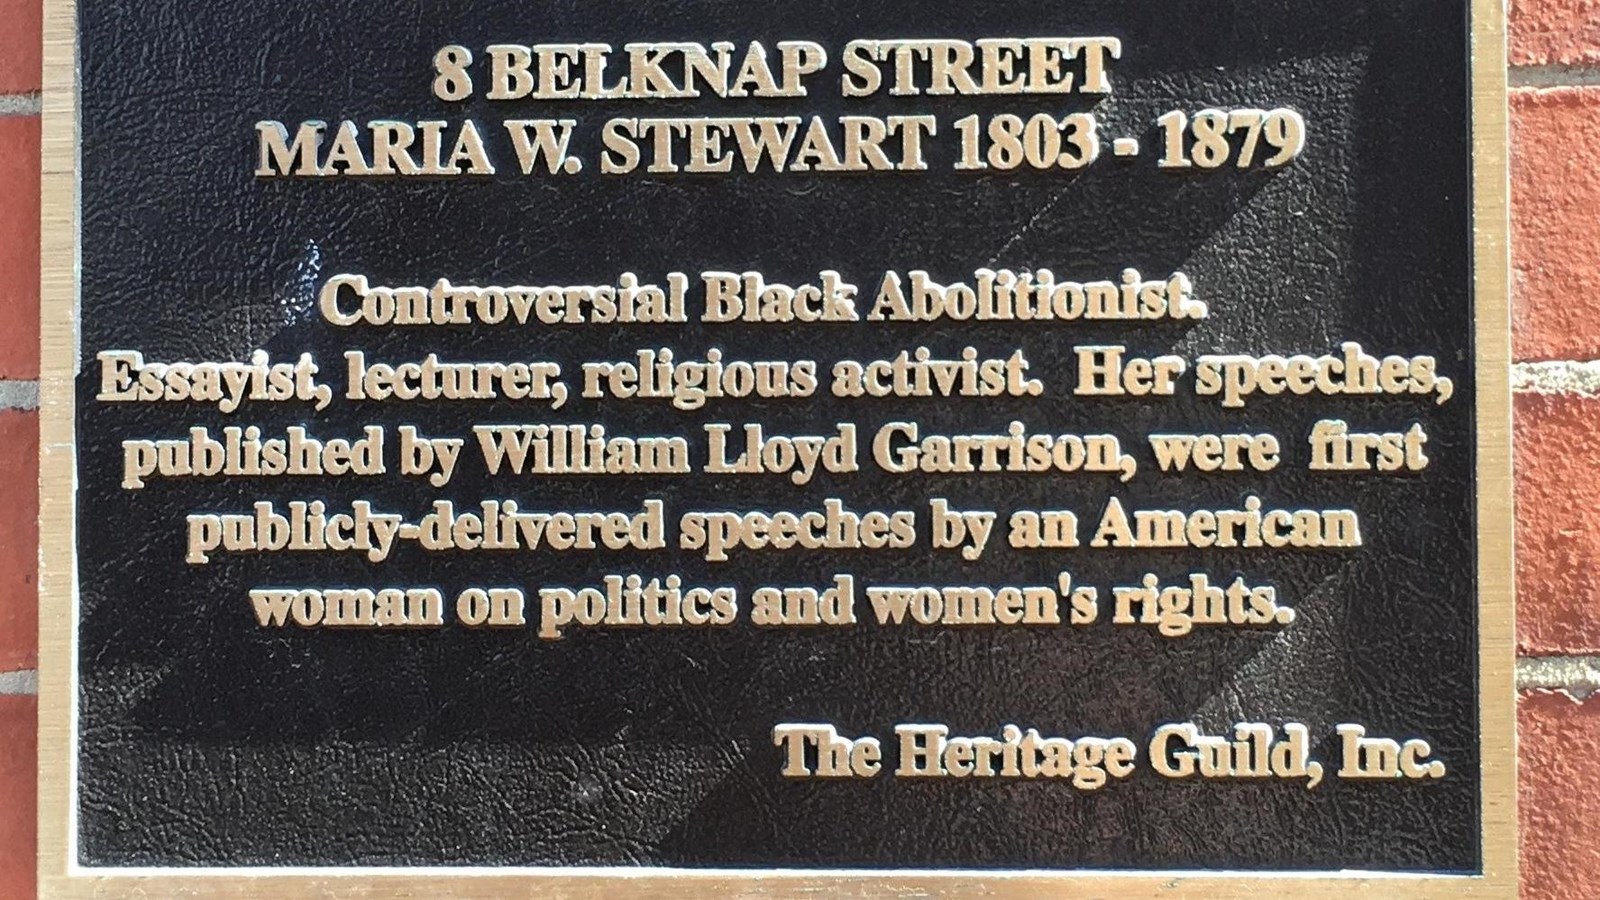 Historical plaque on a brick building identifying the location as the former home of Maria Stewart.